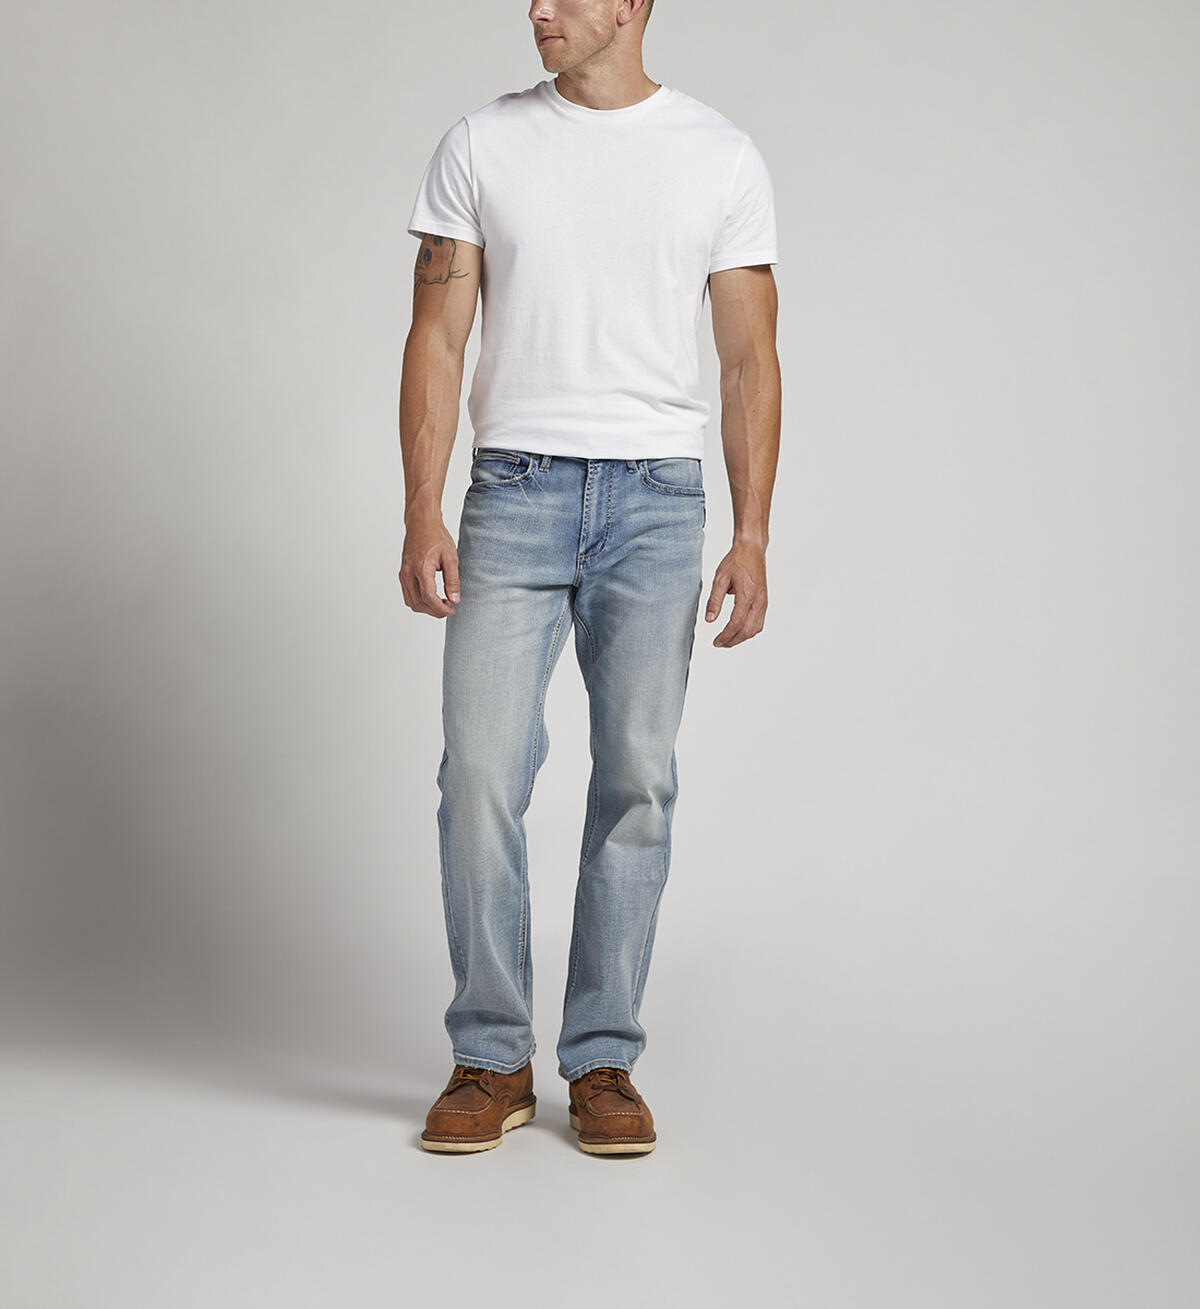 Zac Relaxed Fit Straight Leg Jeans, Indigo, hi-res image number 0